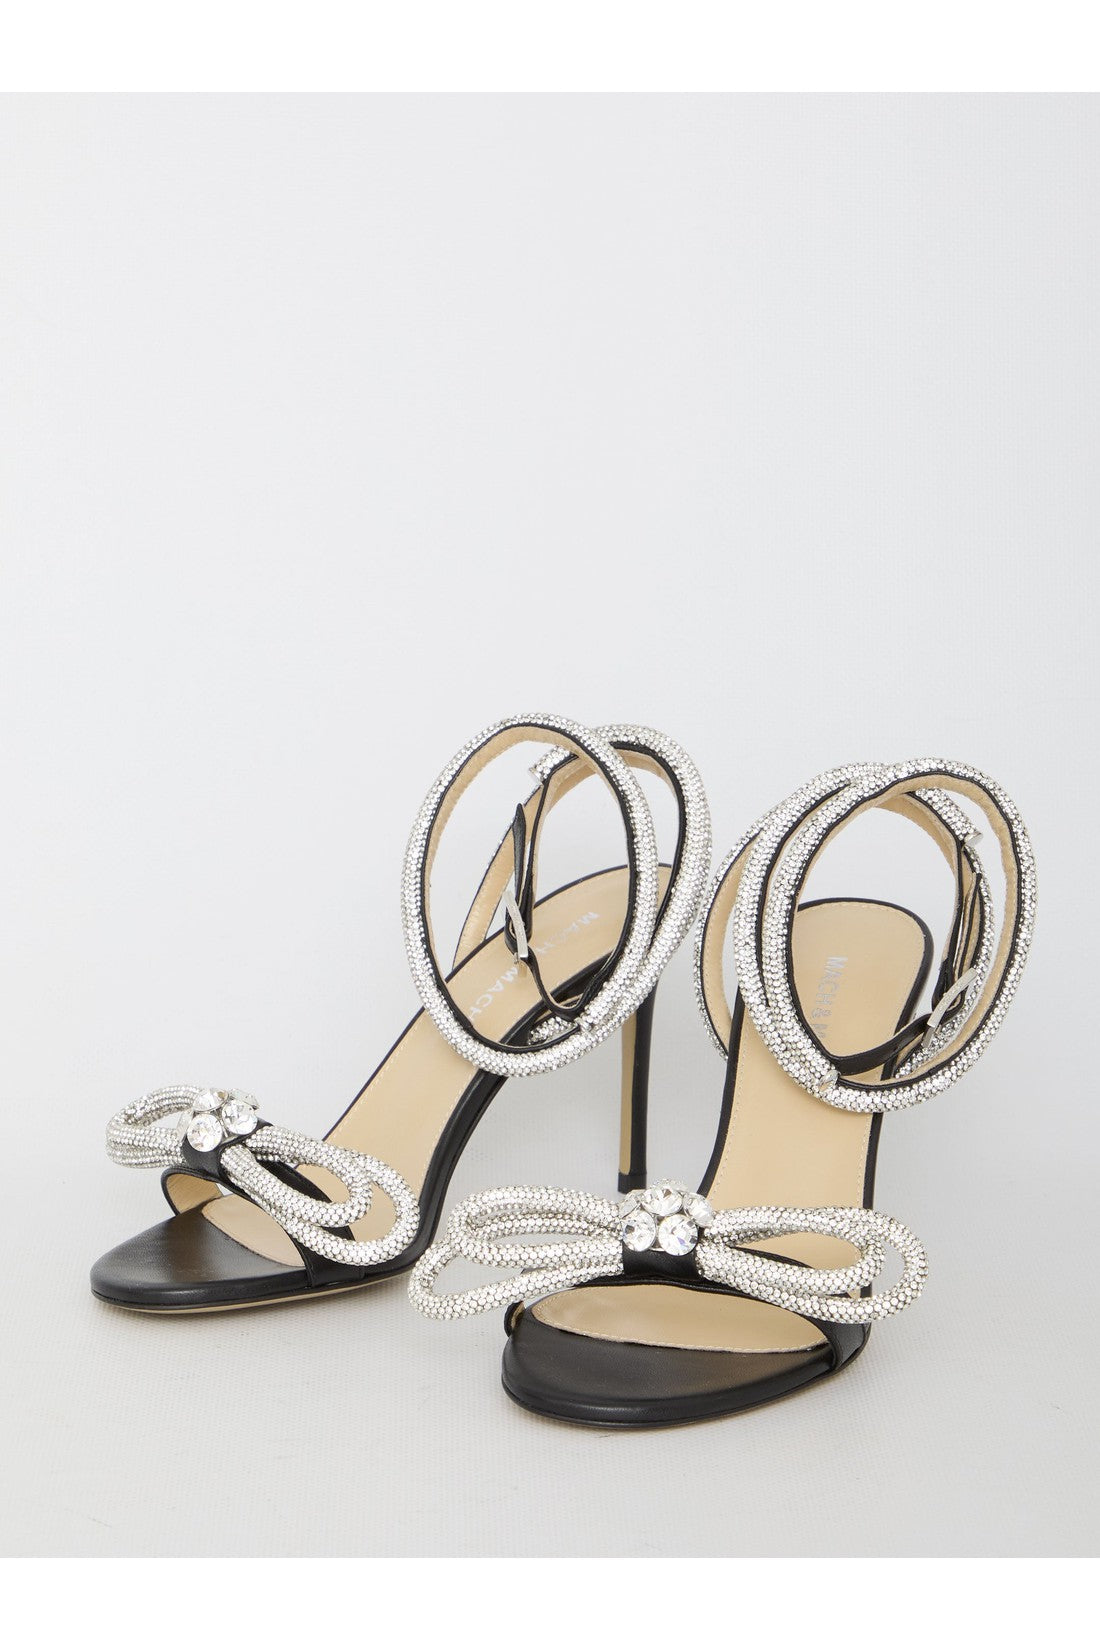 Double Bow sandals